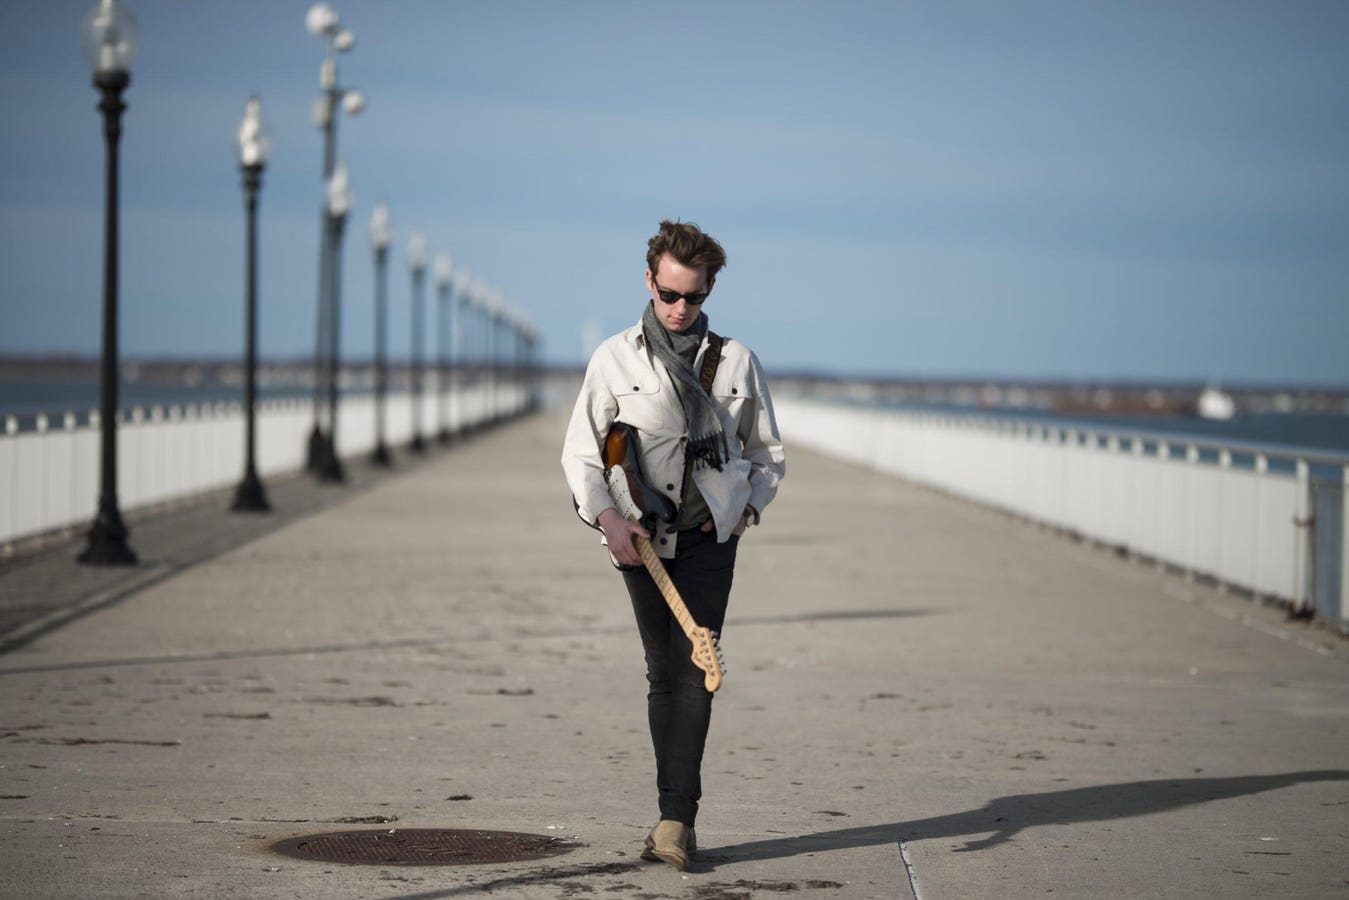 From Moby Dick To Today’s Facelift, New Bedford Is Home To Guitar Virtuoso